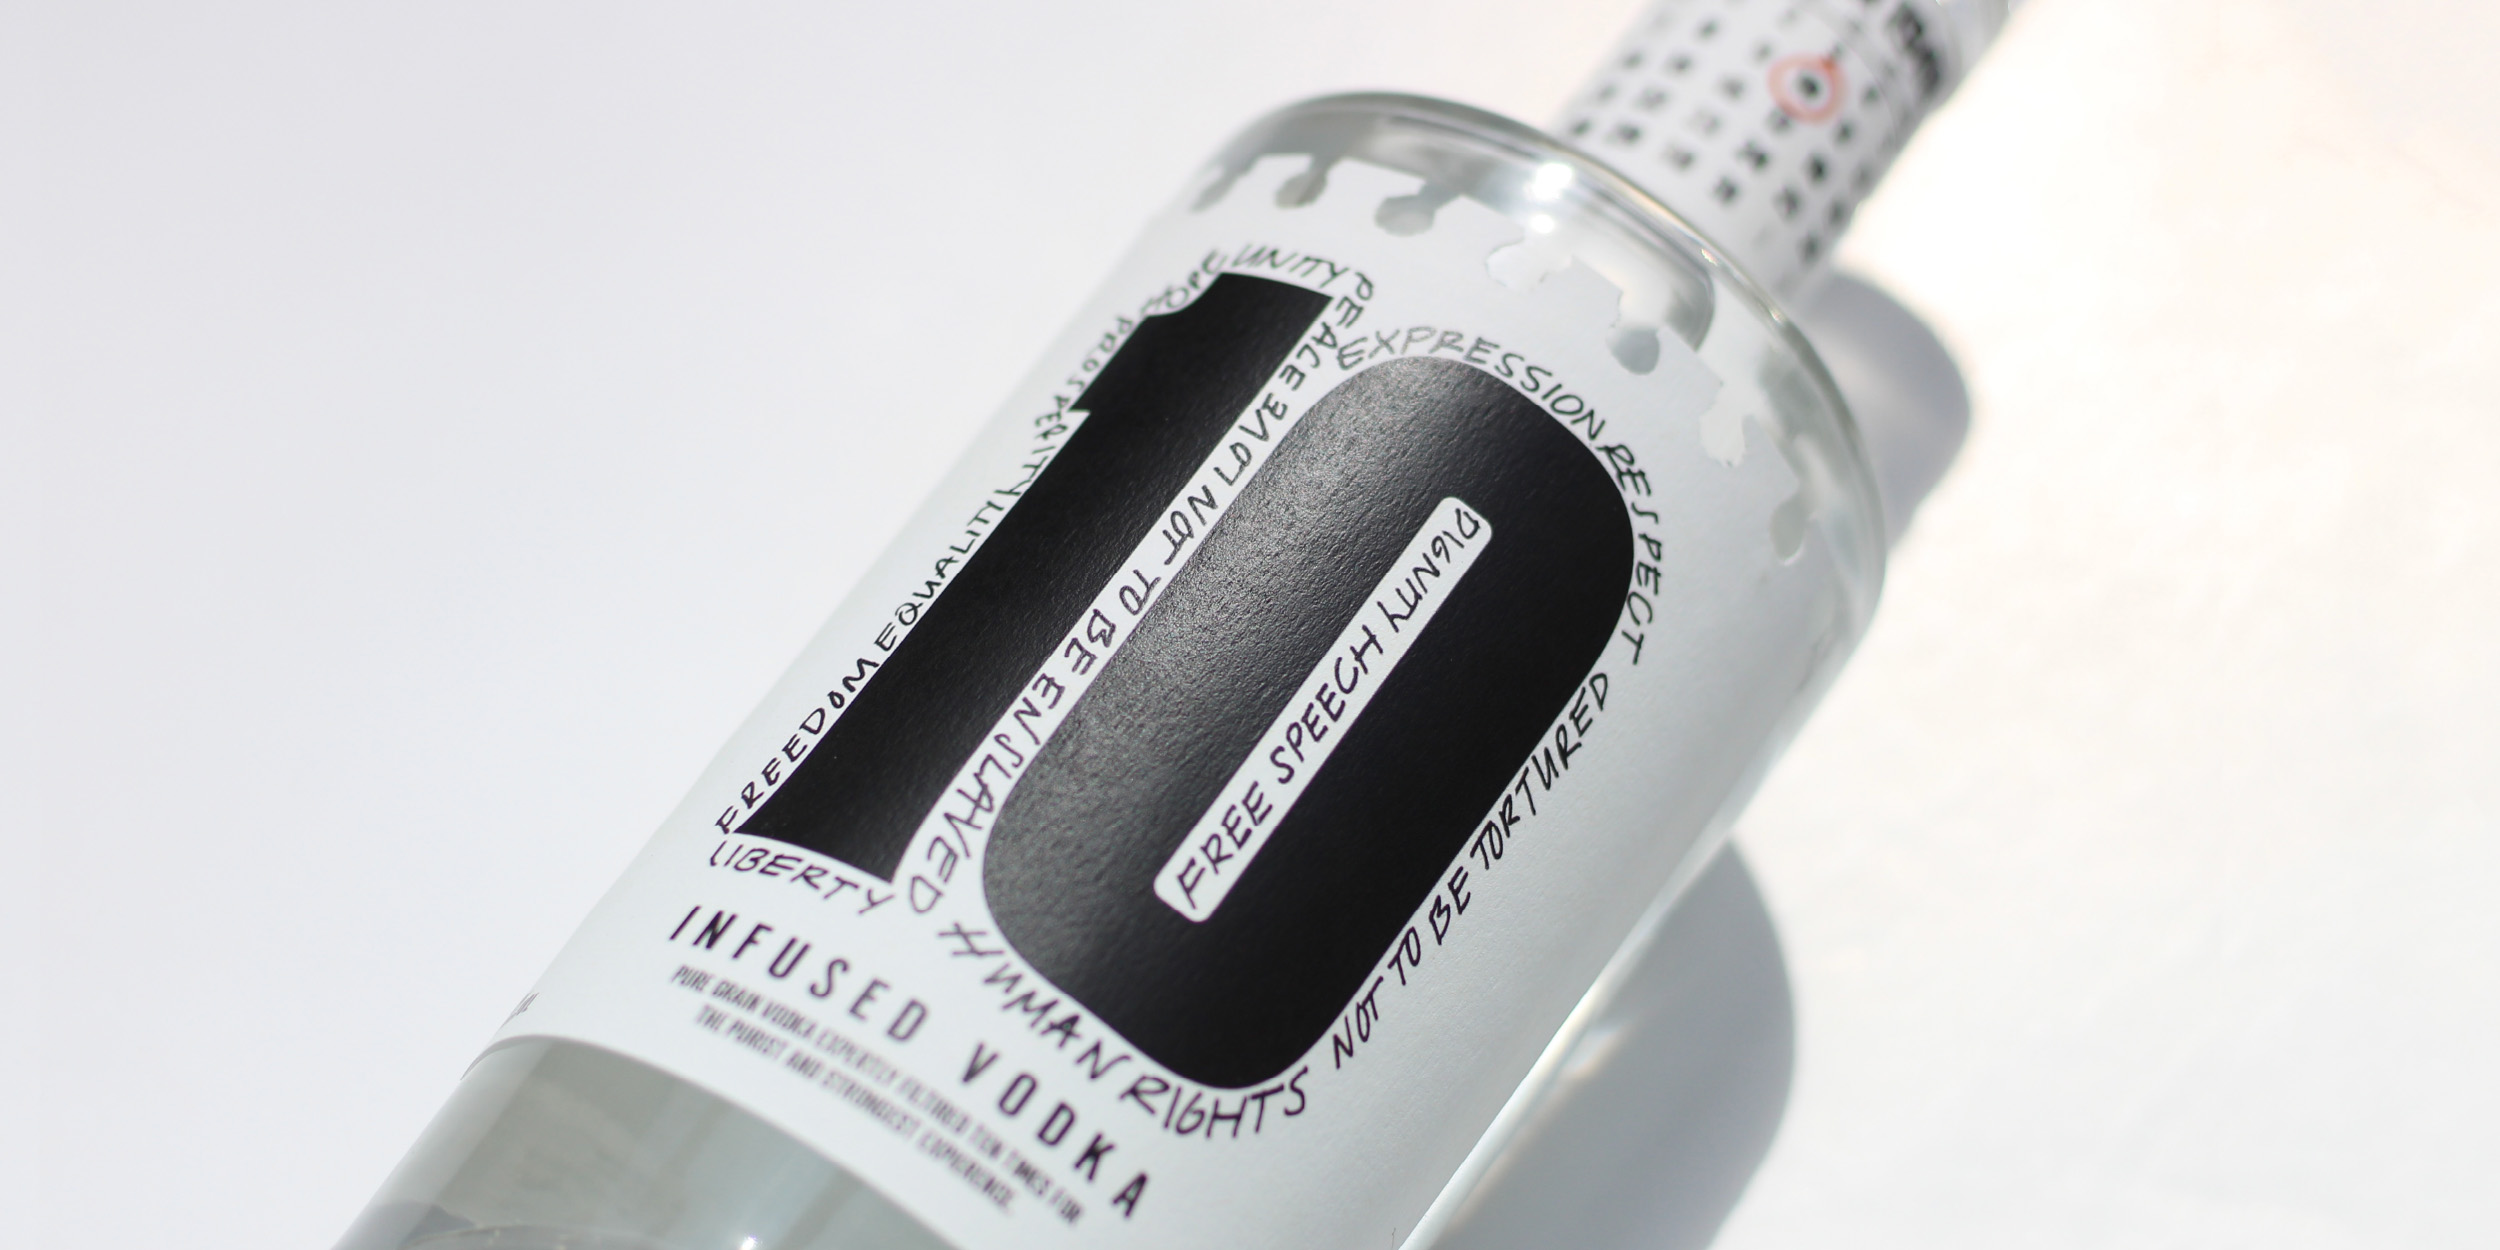 Design work by Cian Paige, showing a close-up shot of the bottle, showcasing the illustrated human rights around the logo.